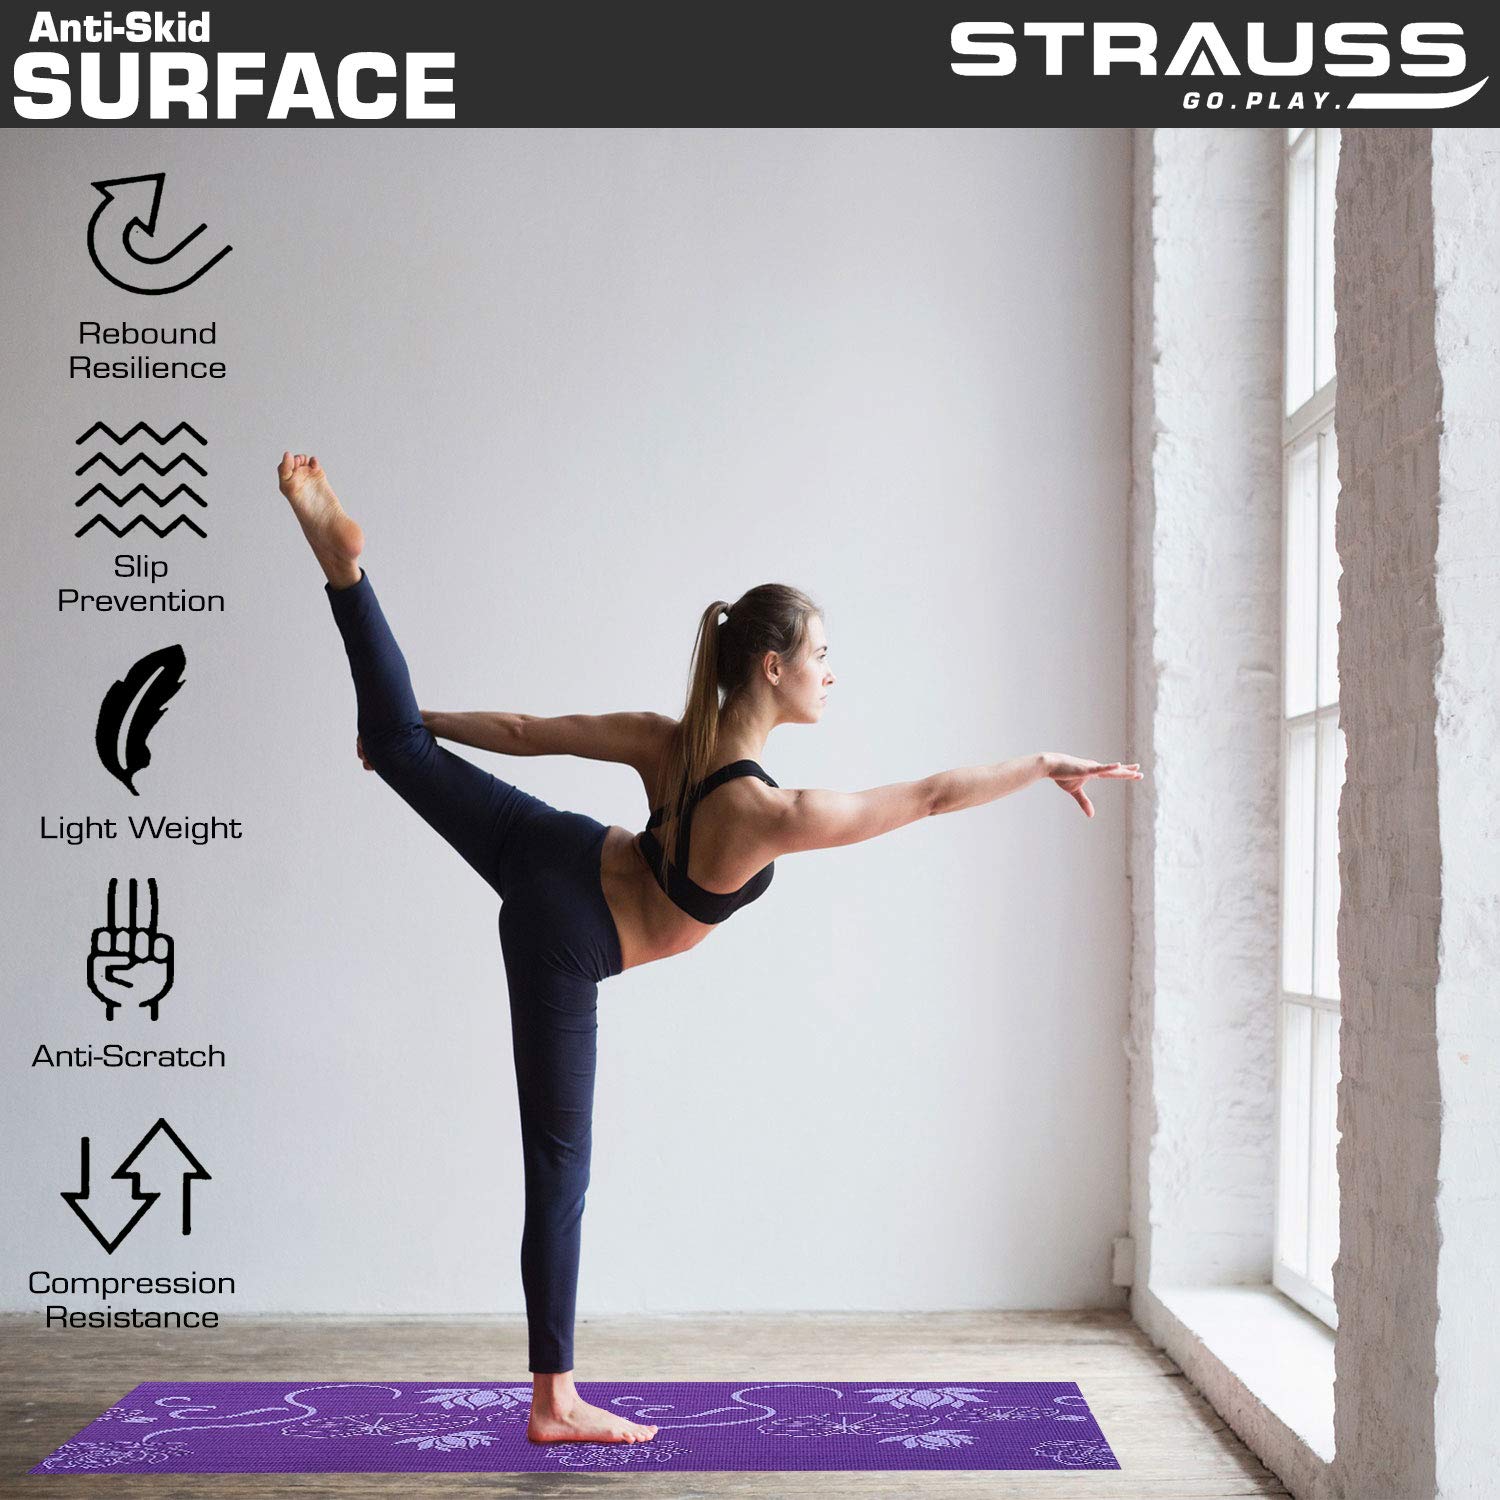 Strauss Yoga Mat 6MM (Floral Green) and Yoga Shoes, (Black)